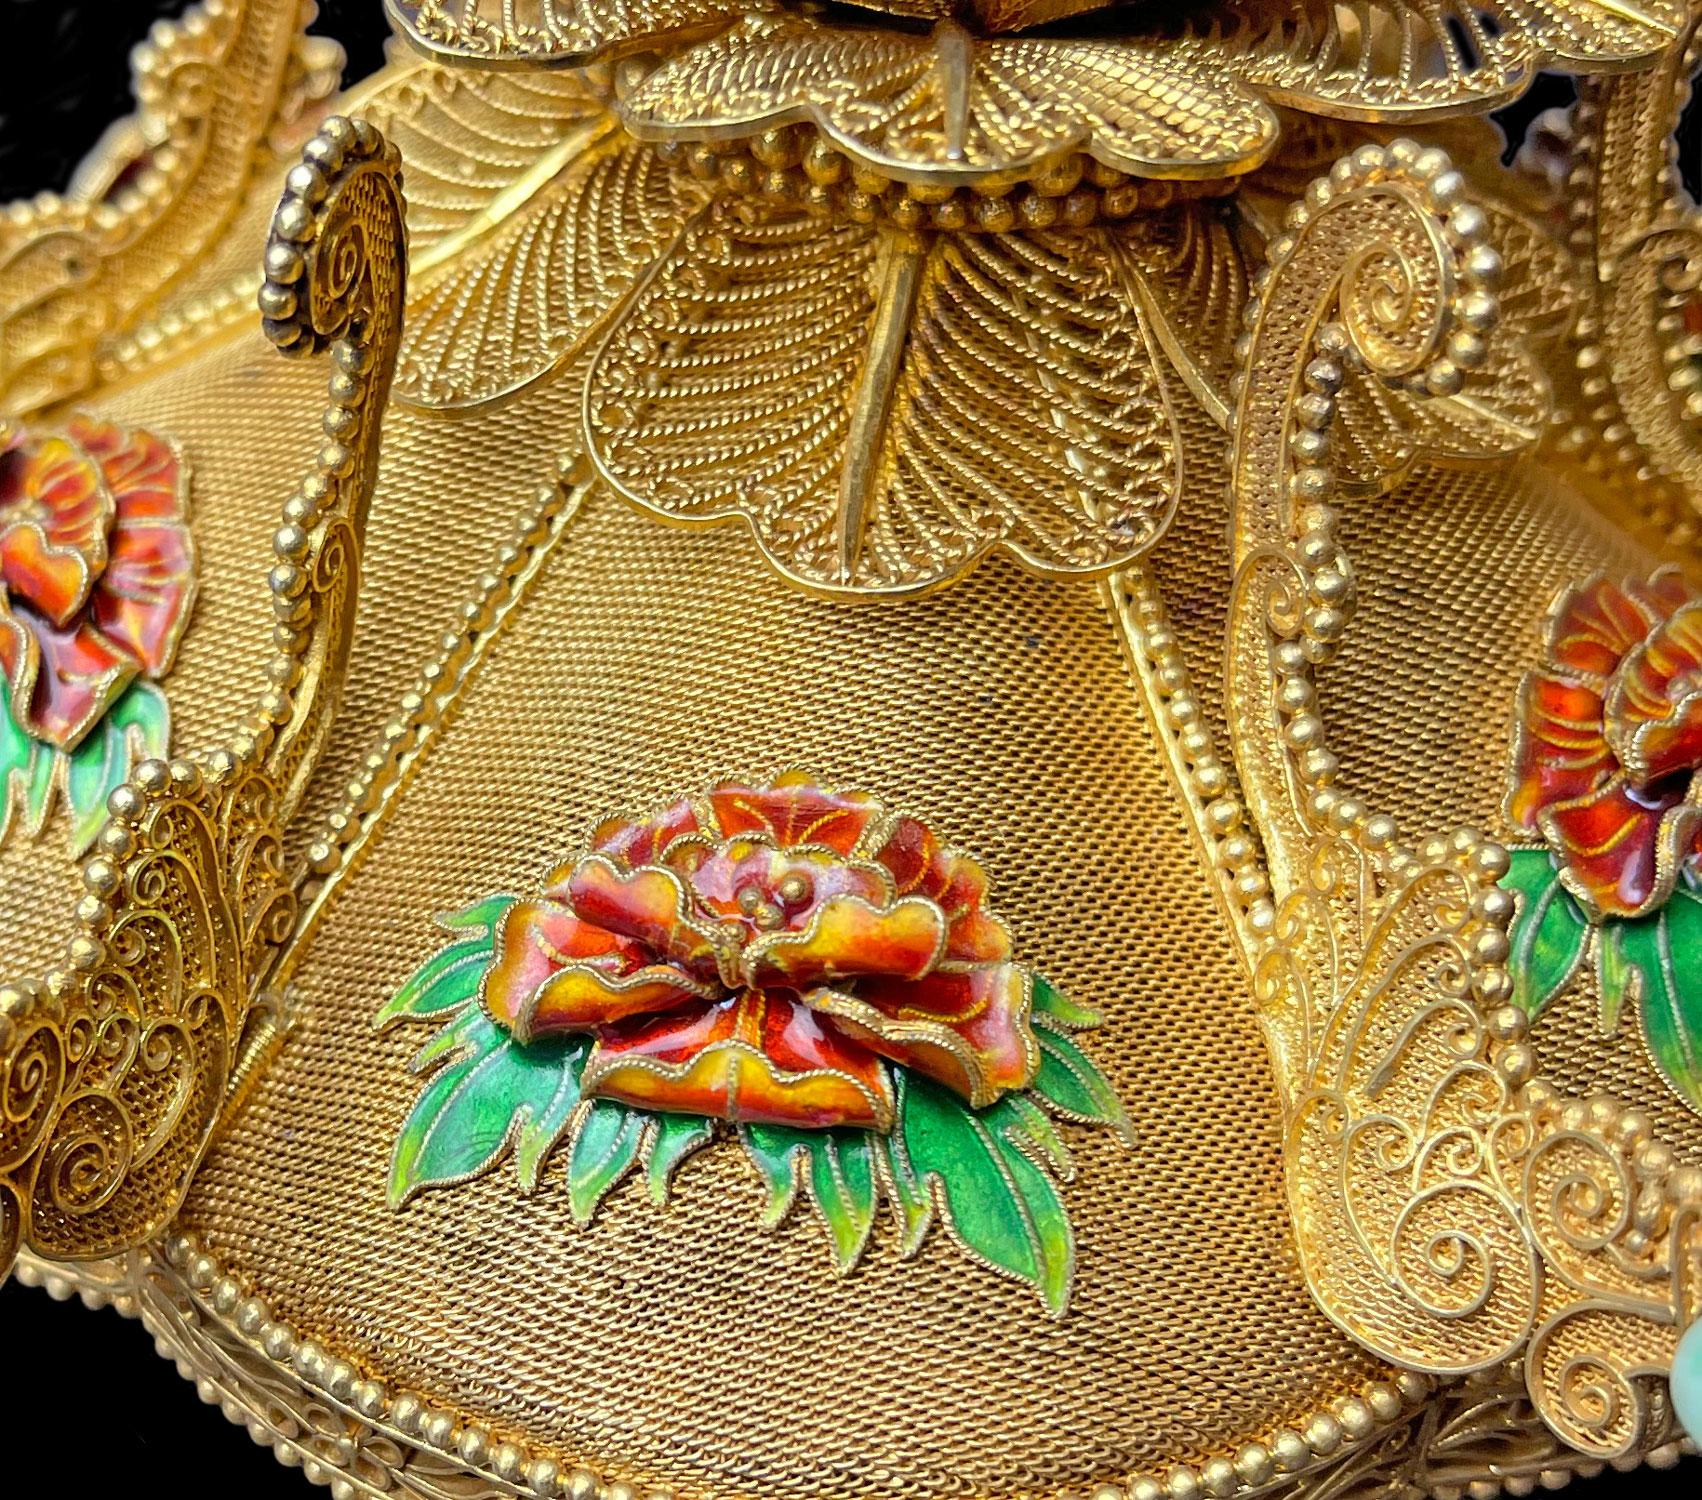 Chinese Enameled & Jeweled Gilt Silver Filigree Work Potpourri Urn, Circa 1900 For Sale 1